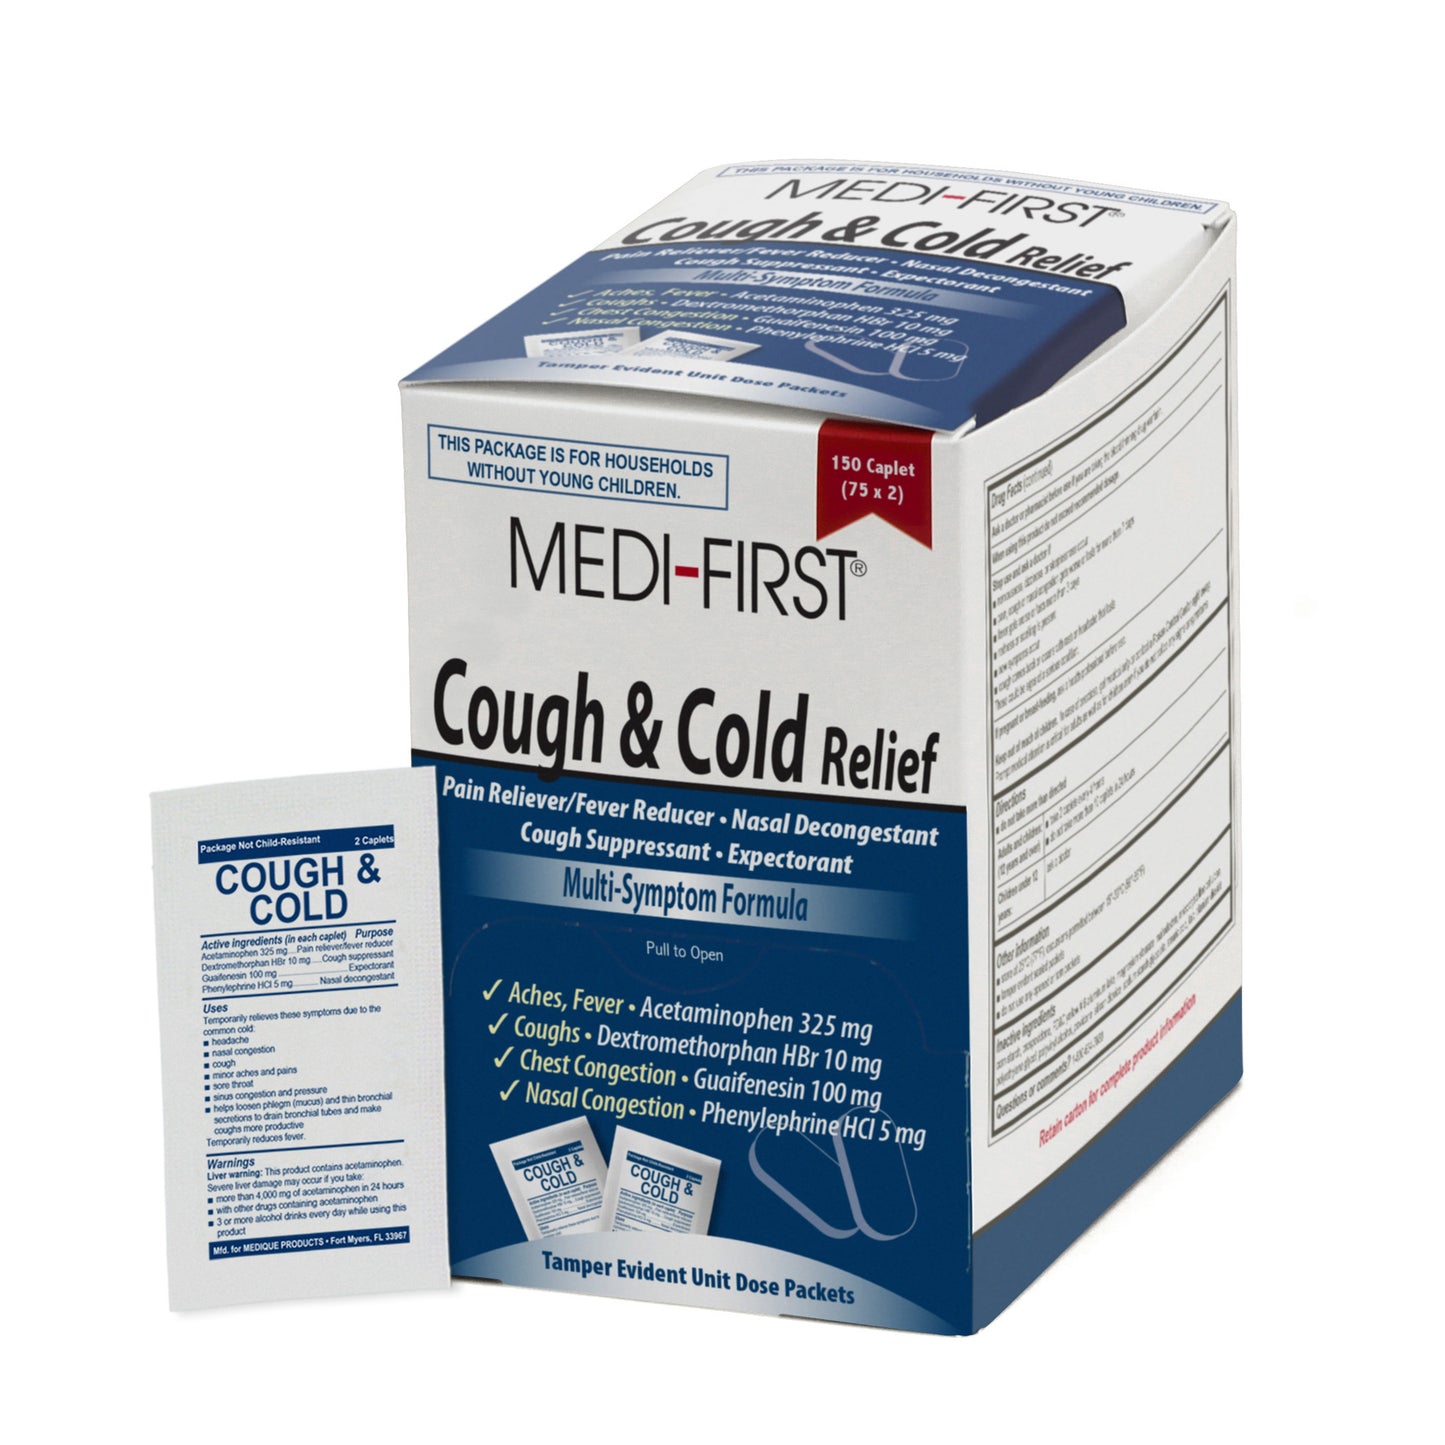 Cough & Cold Relief